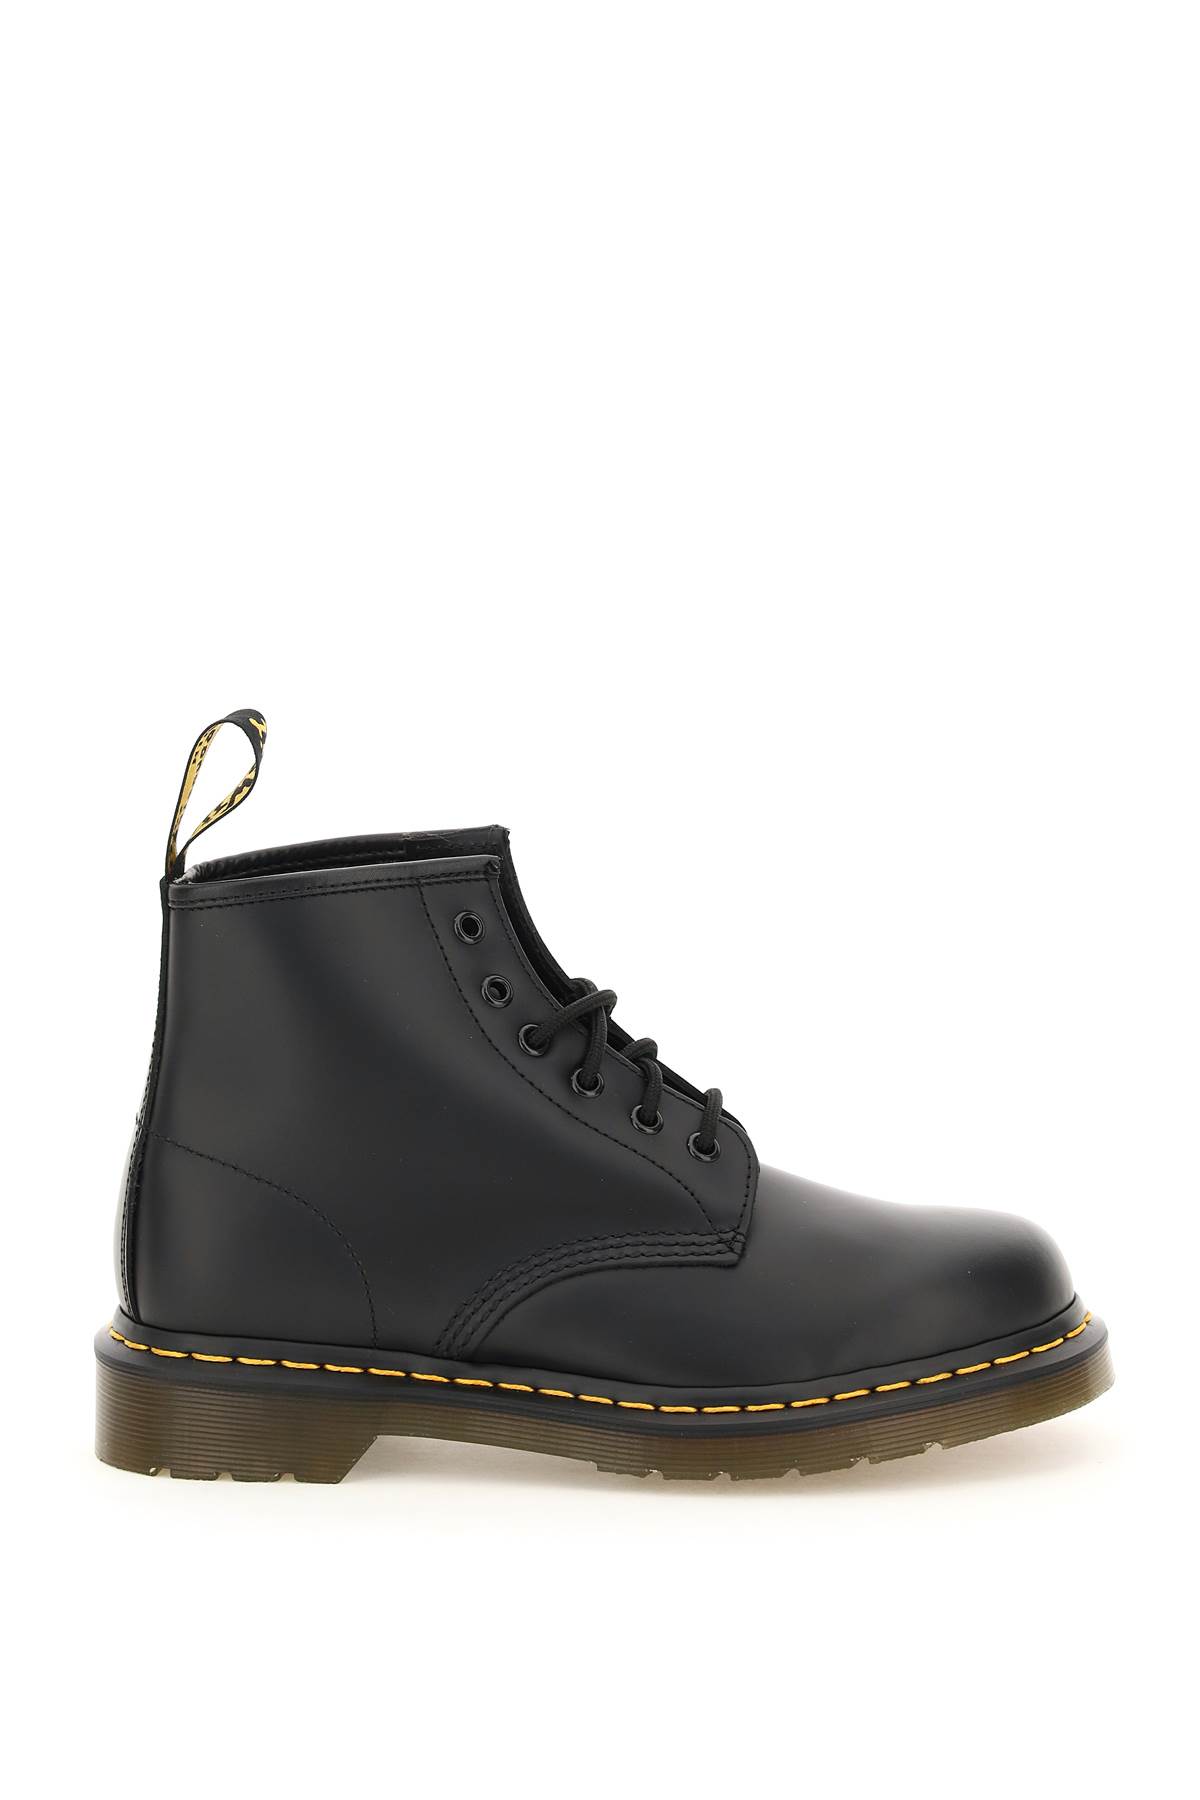 DR. MARTENS' 101 SMOOTH LACE-UP COMBAT BOOTS